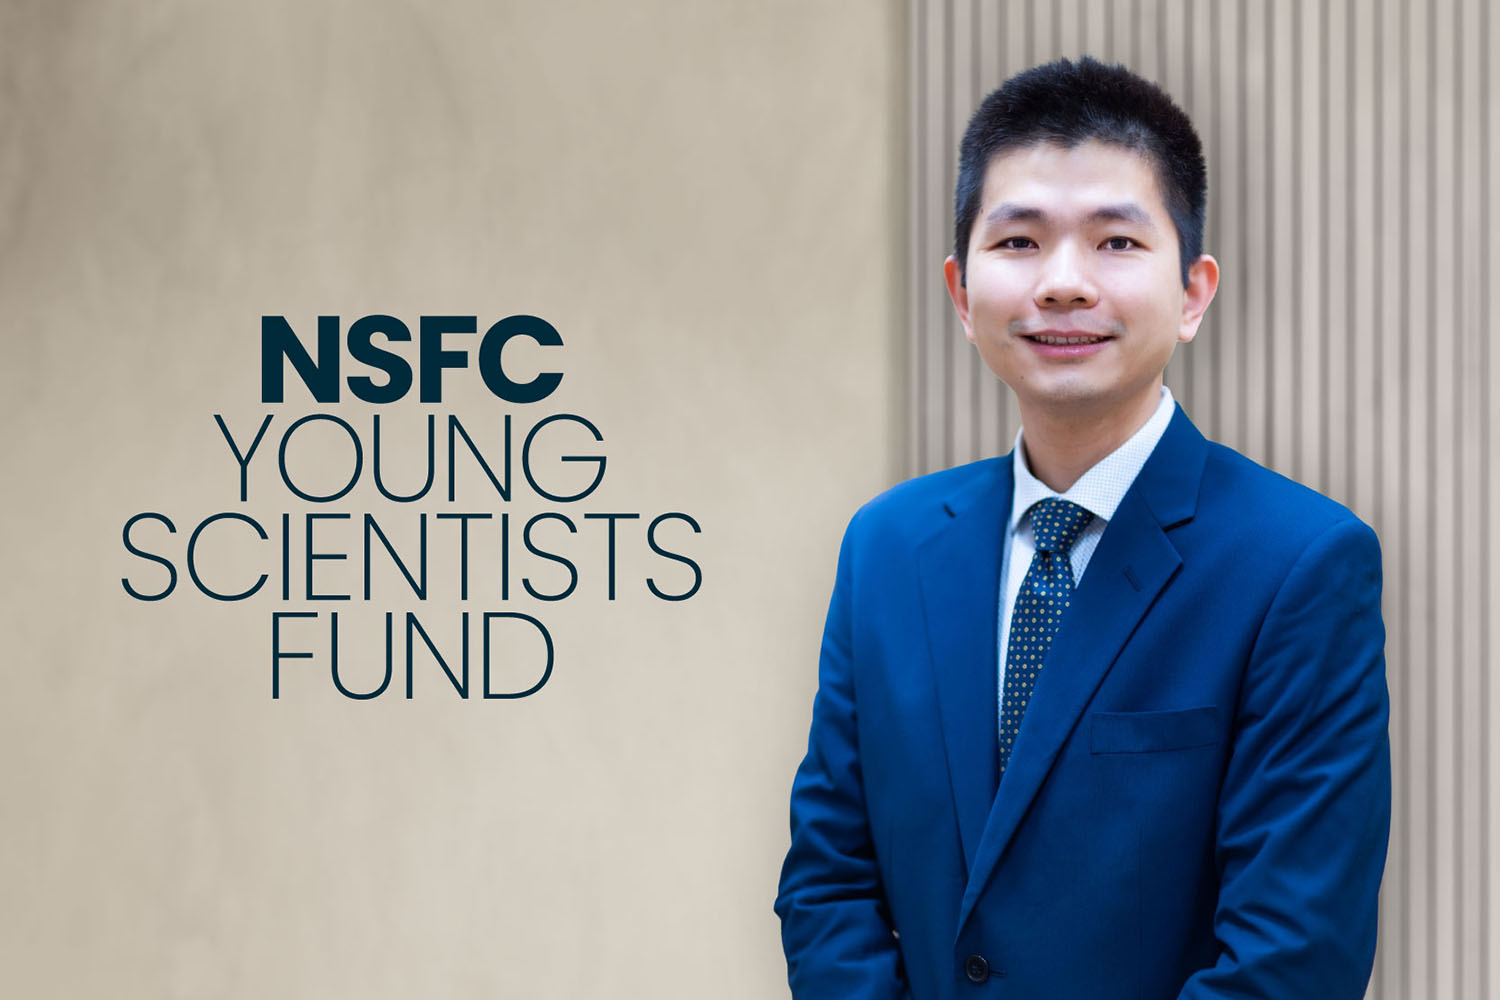 Faculty Scholar Received China’s NSFC Young Scientists Fund